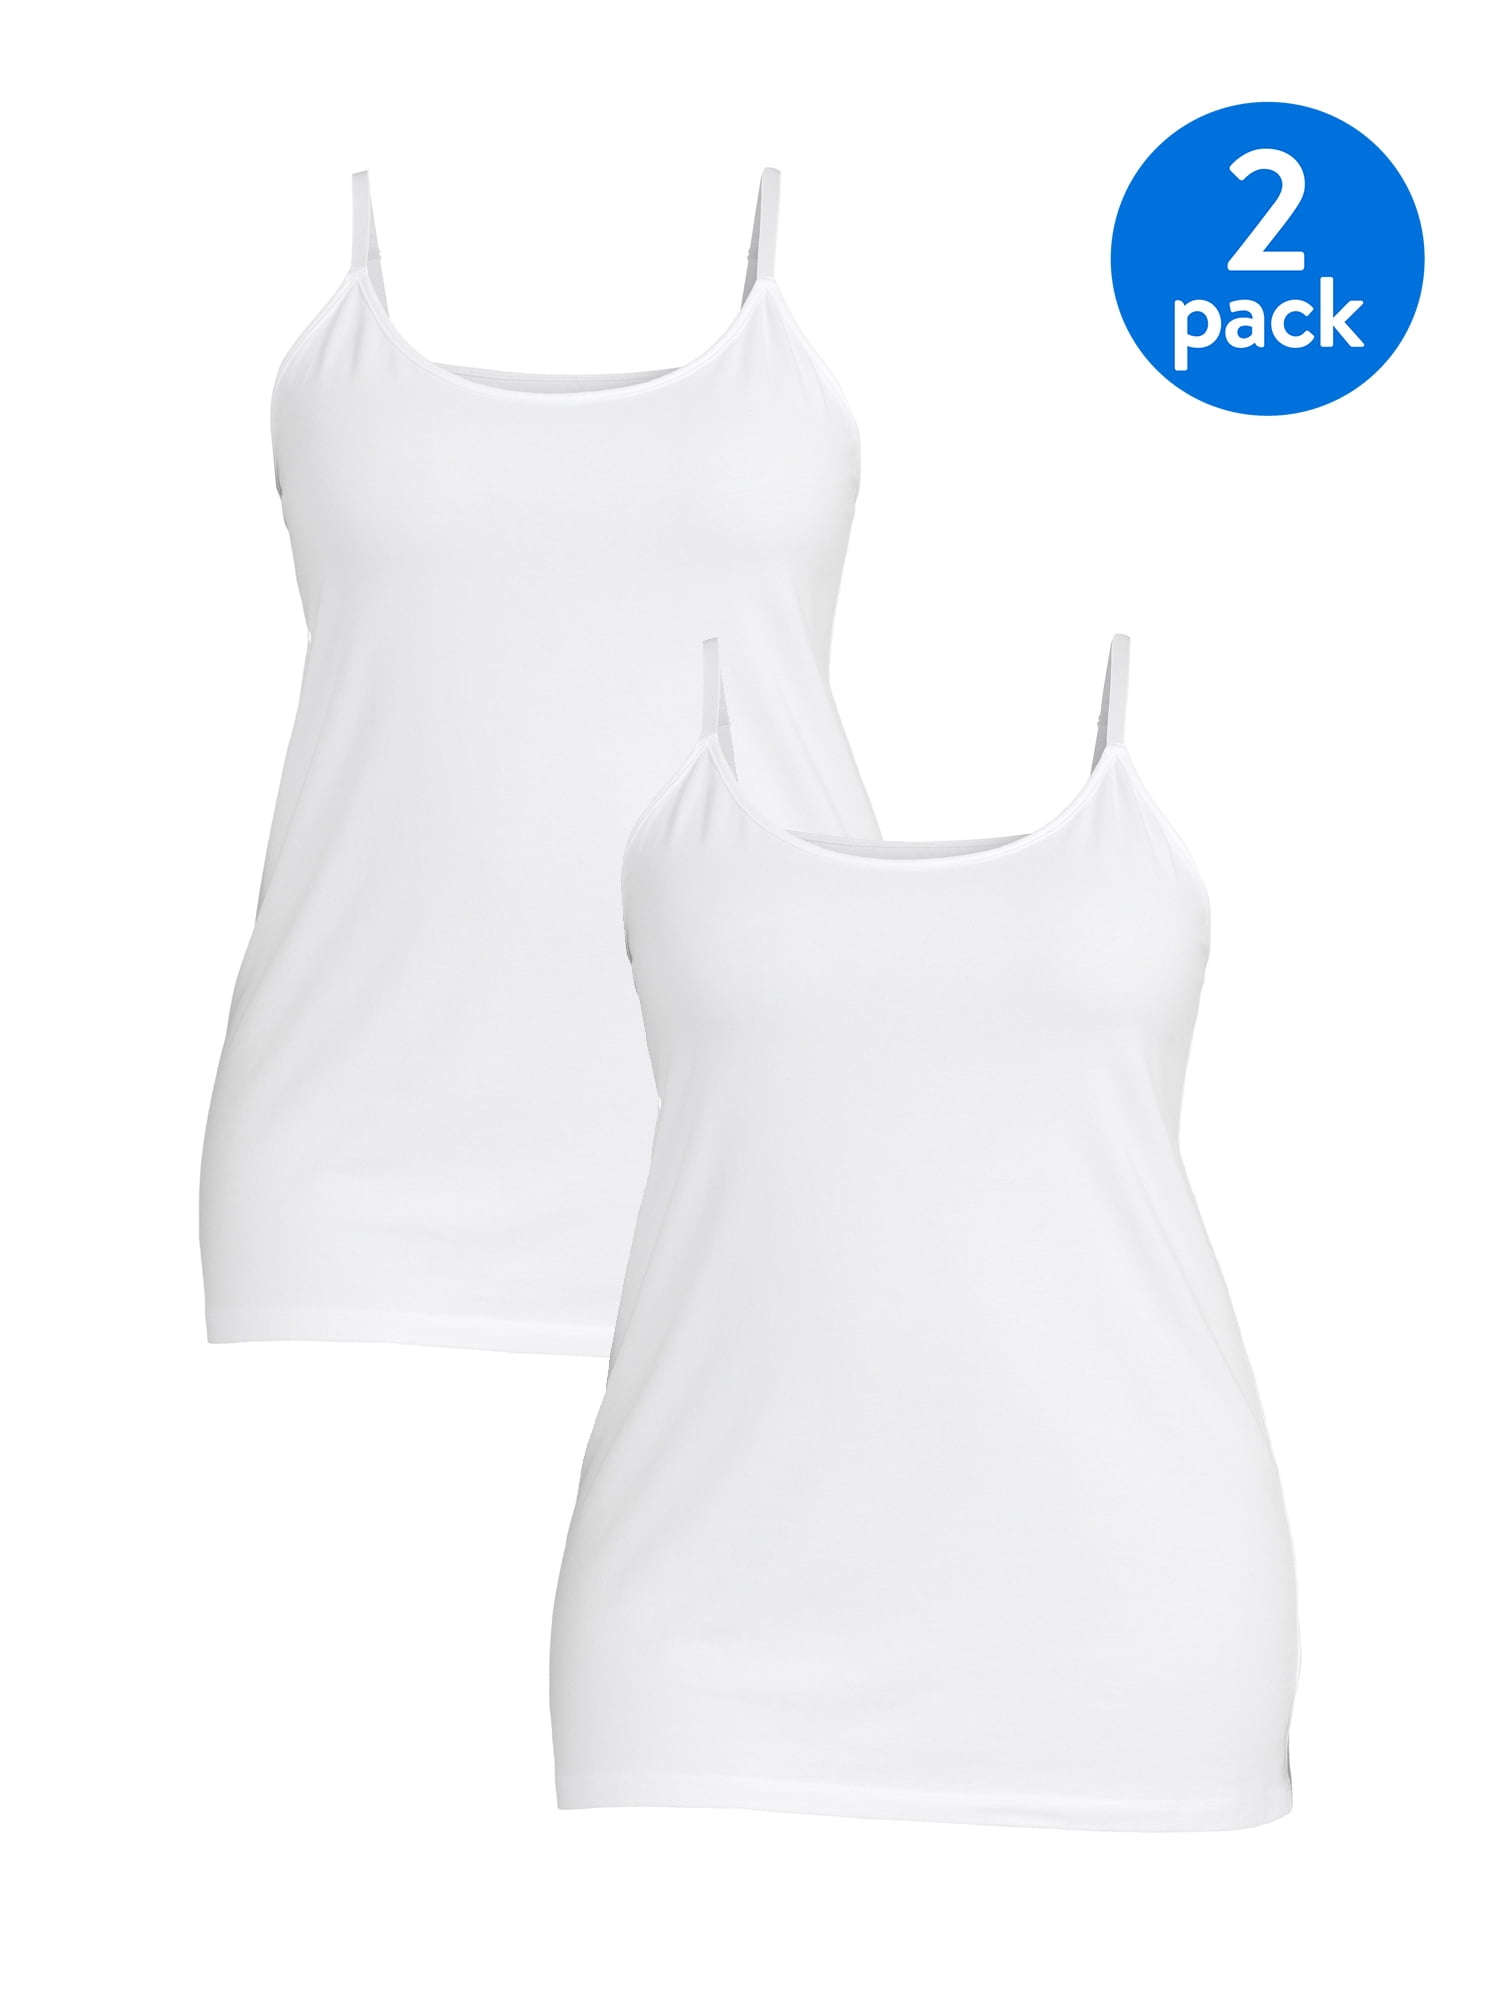 Walmart And Sky Plus Size Clothing - Walmart.ComTerra And Sky Cami